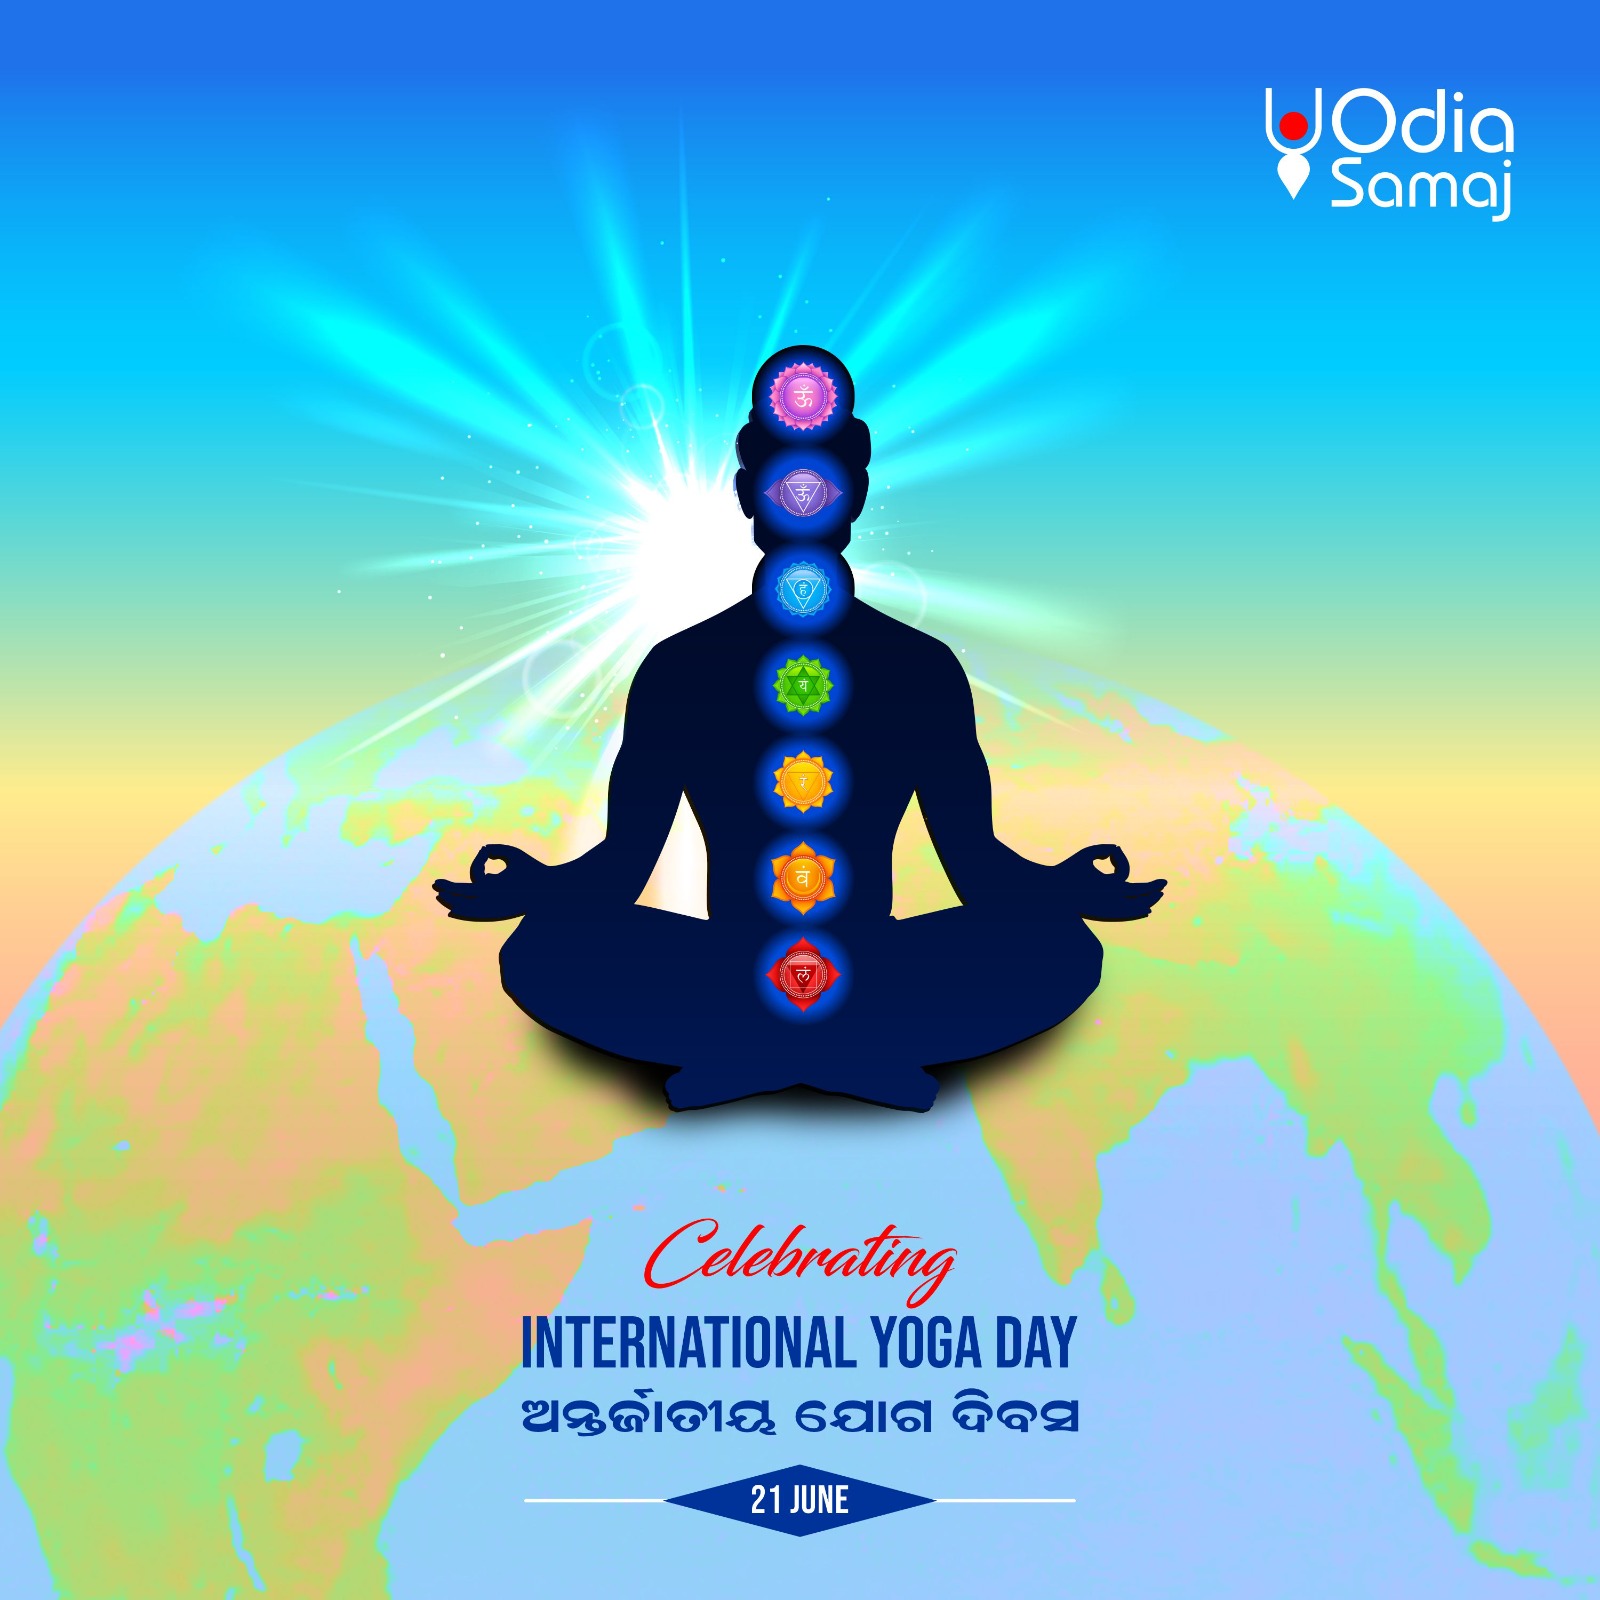 Today is International Yoga Day.